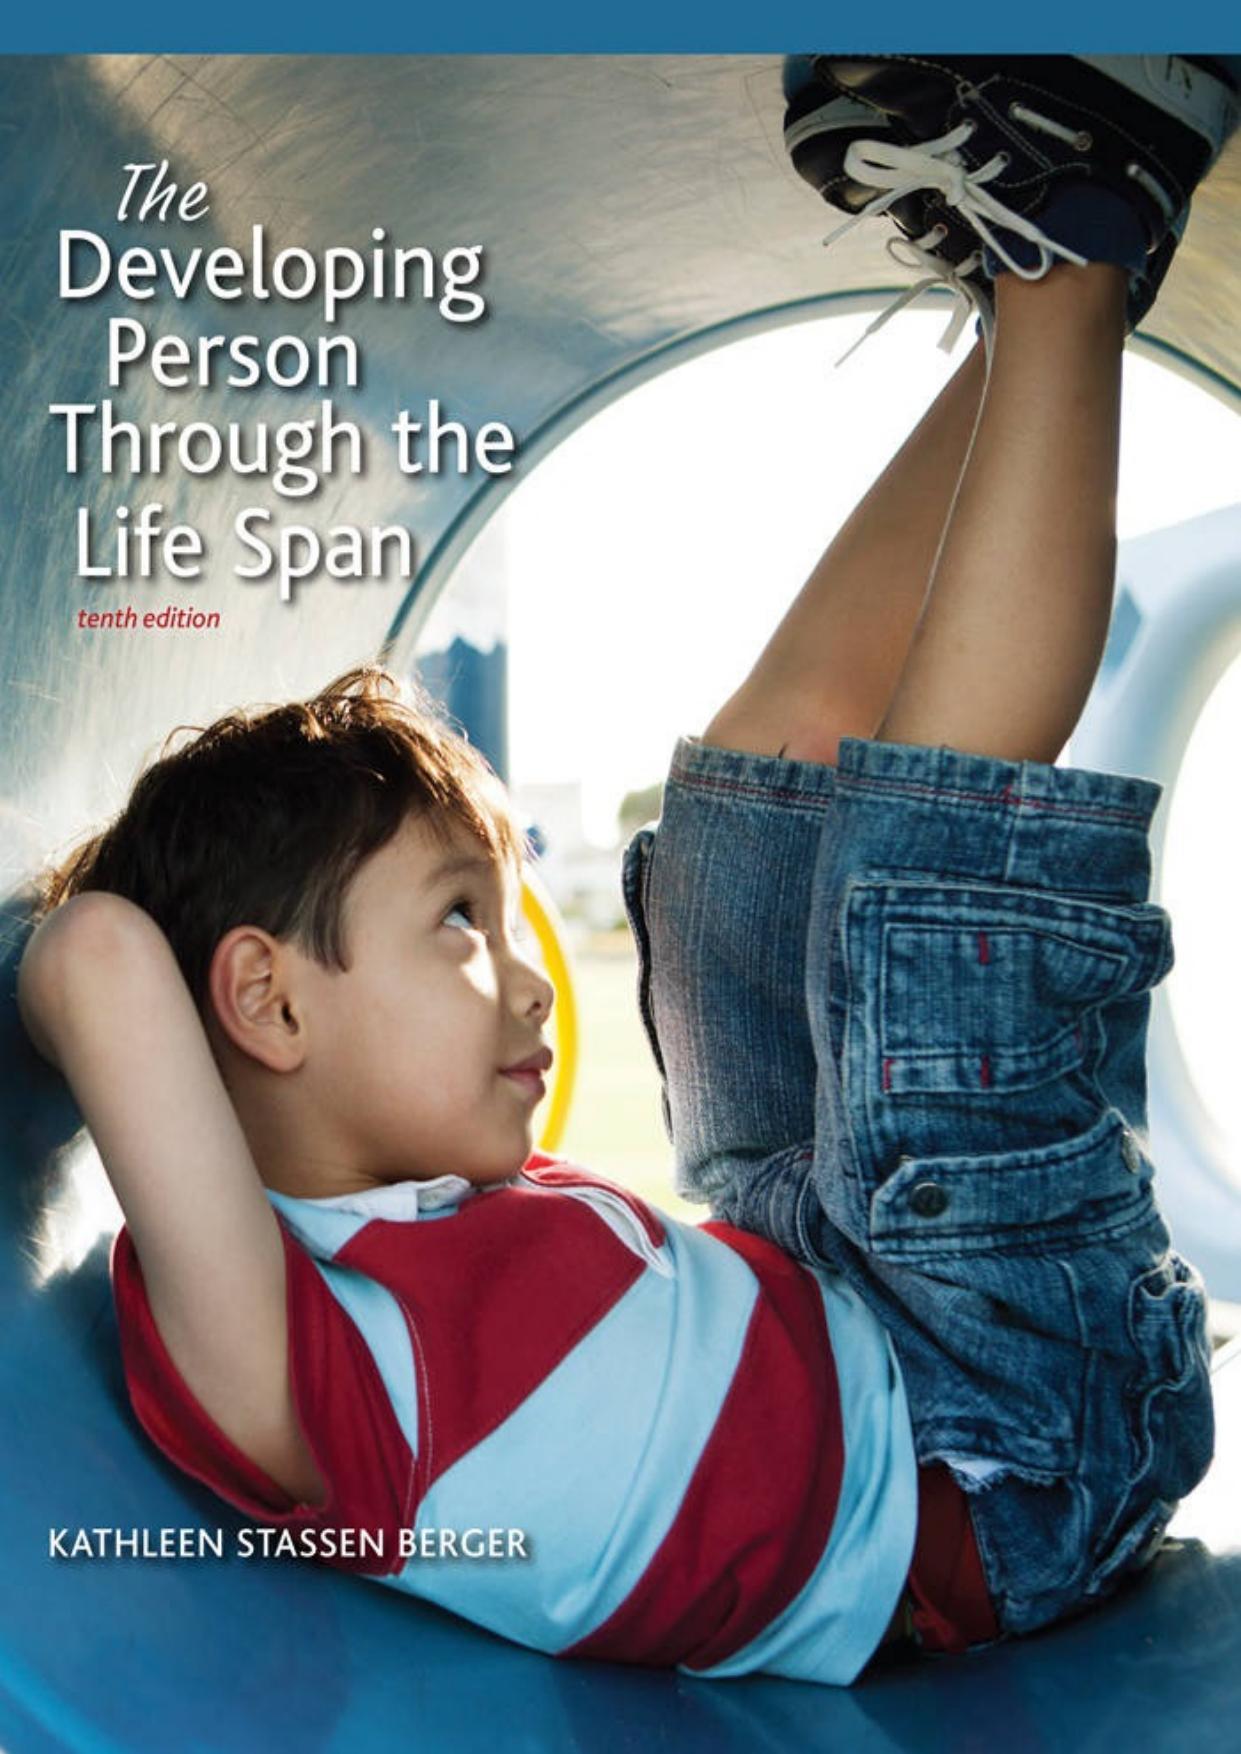 Developing Person Through the Life Span 10th Edition.jpg